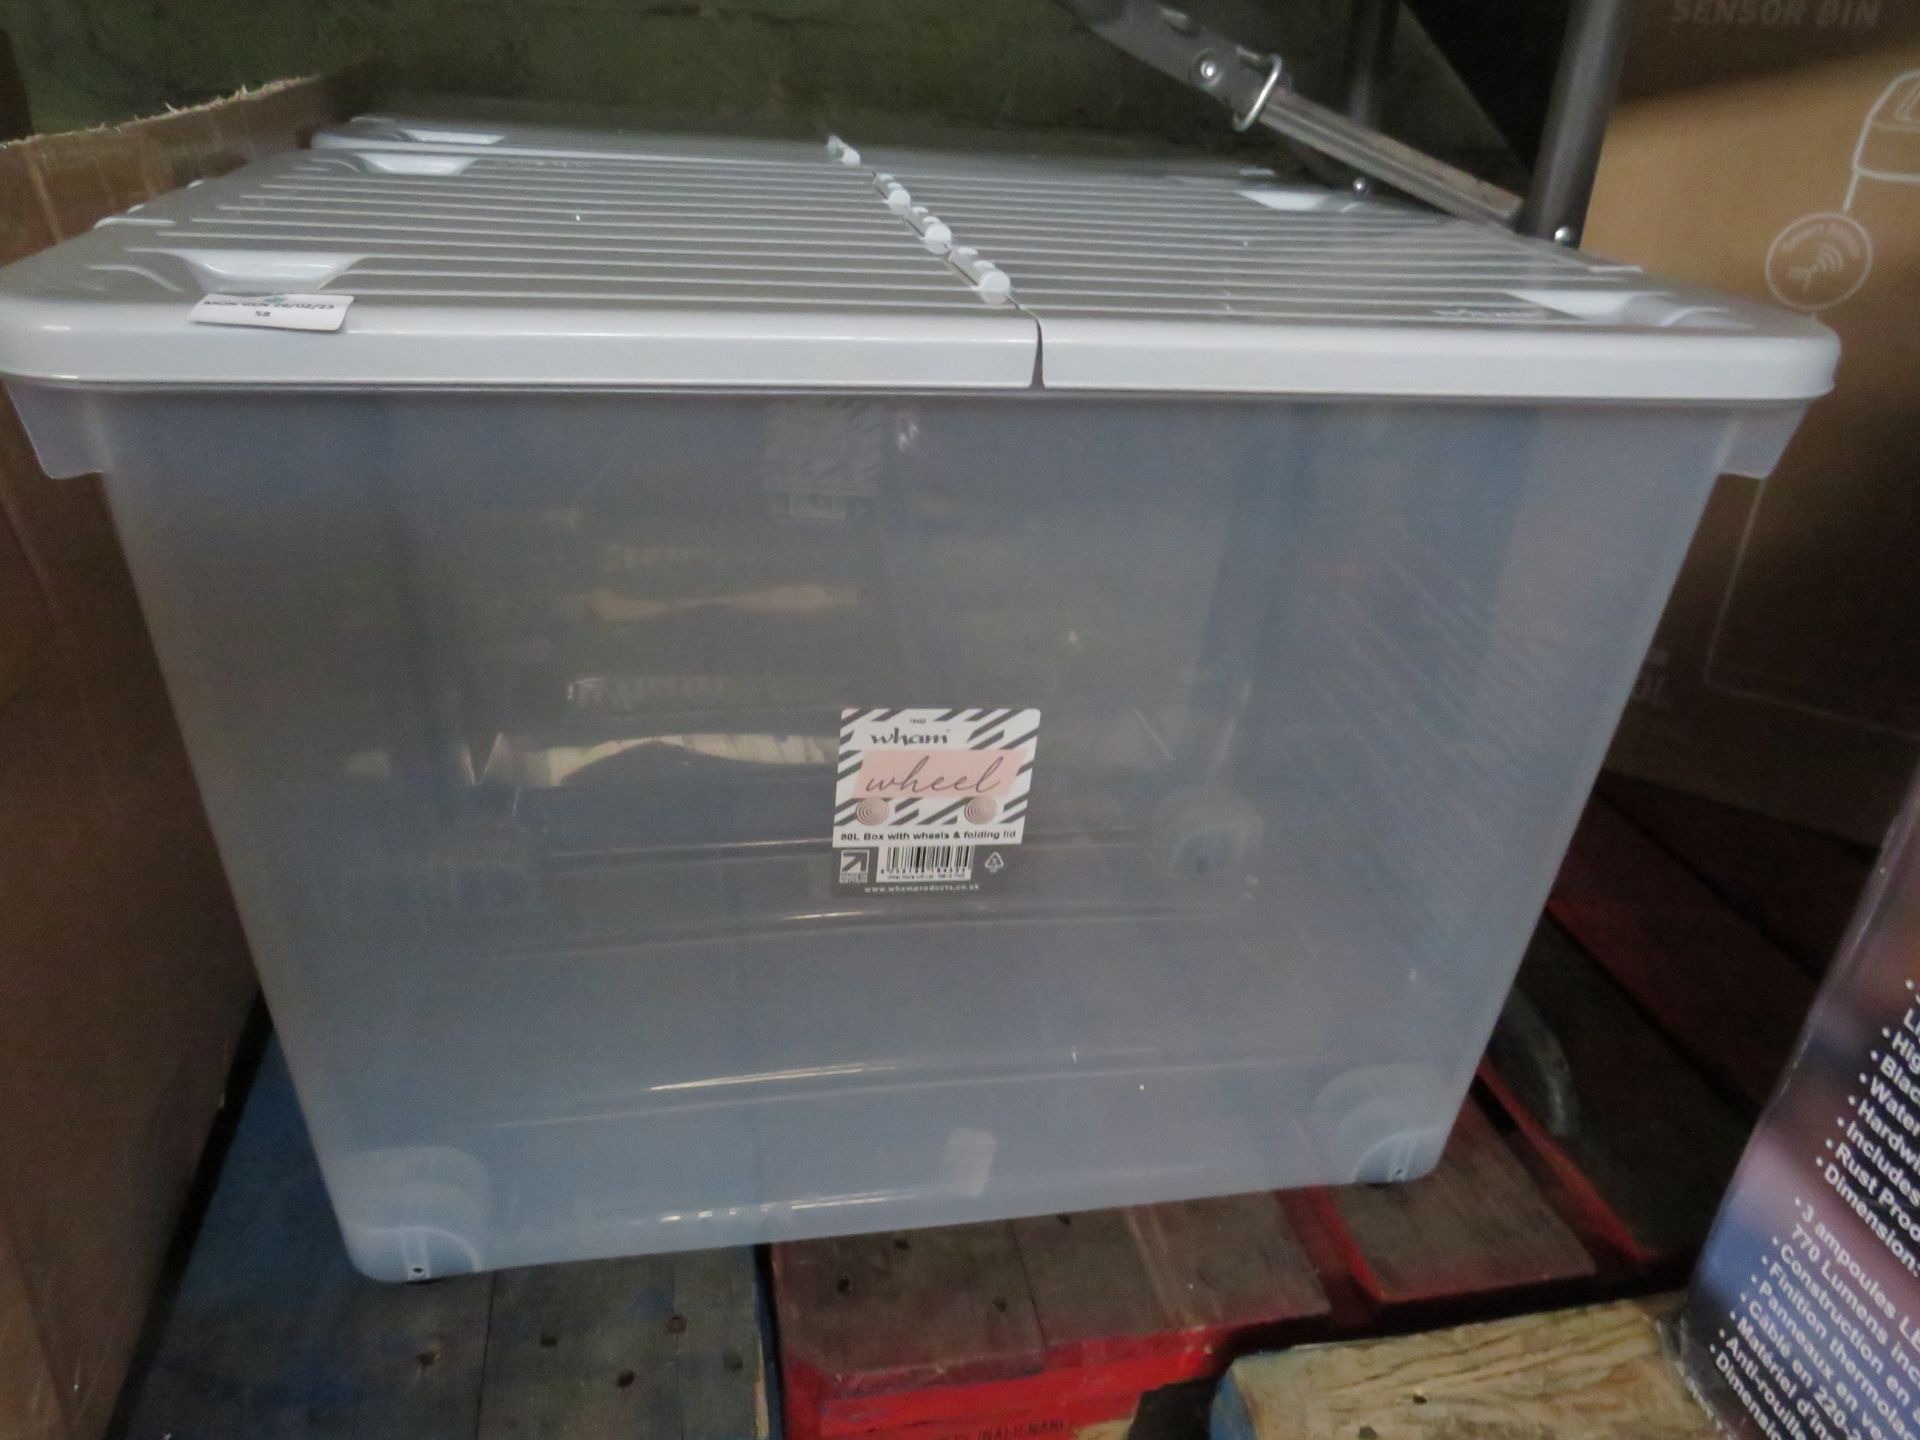 2x Wham - Plastic Storage Boxes With Lids - Good Condition.